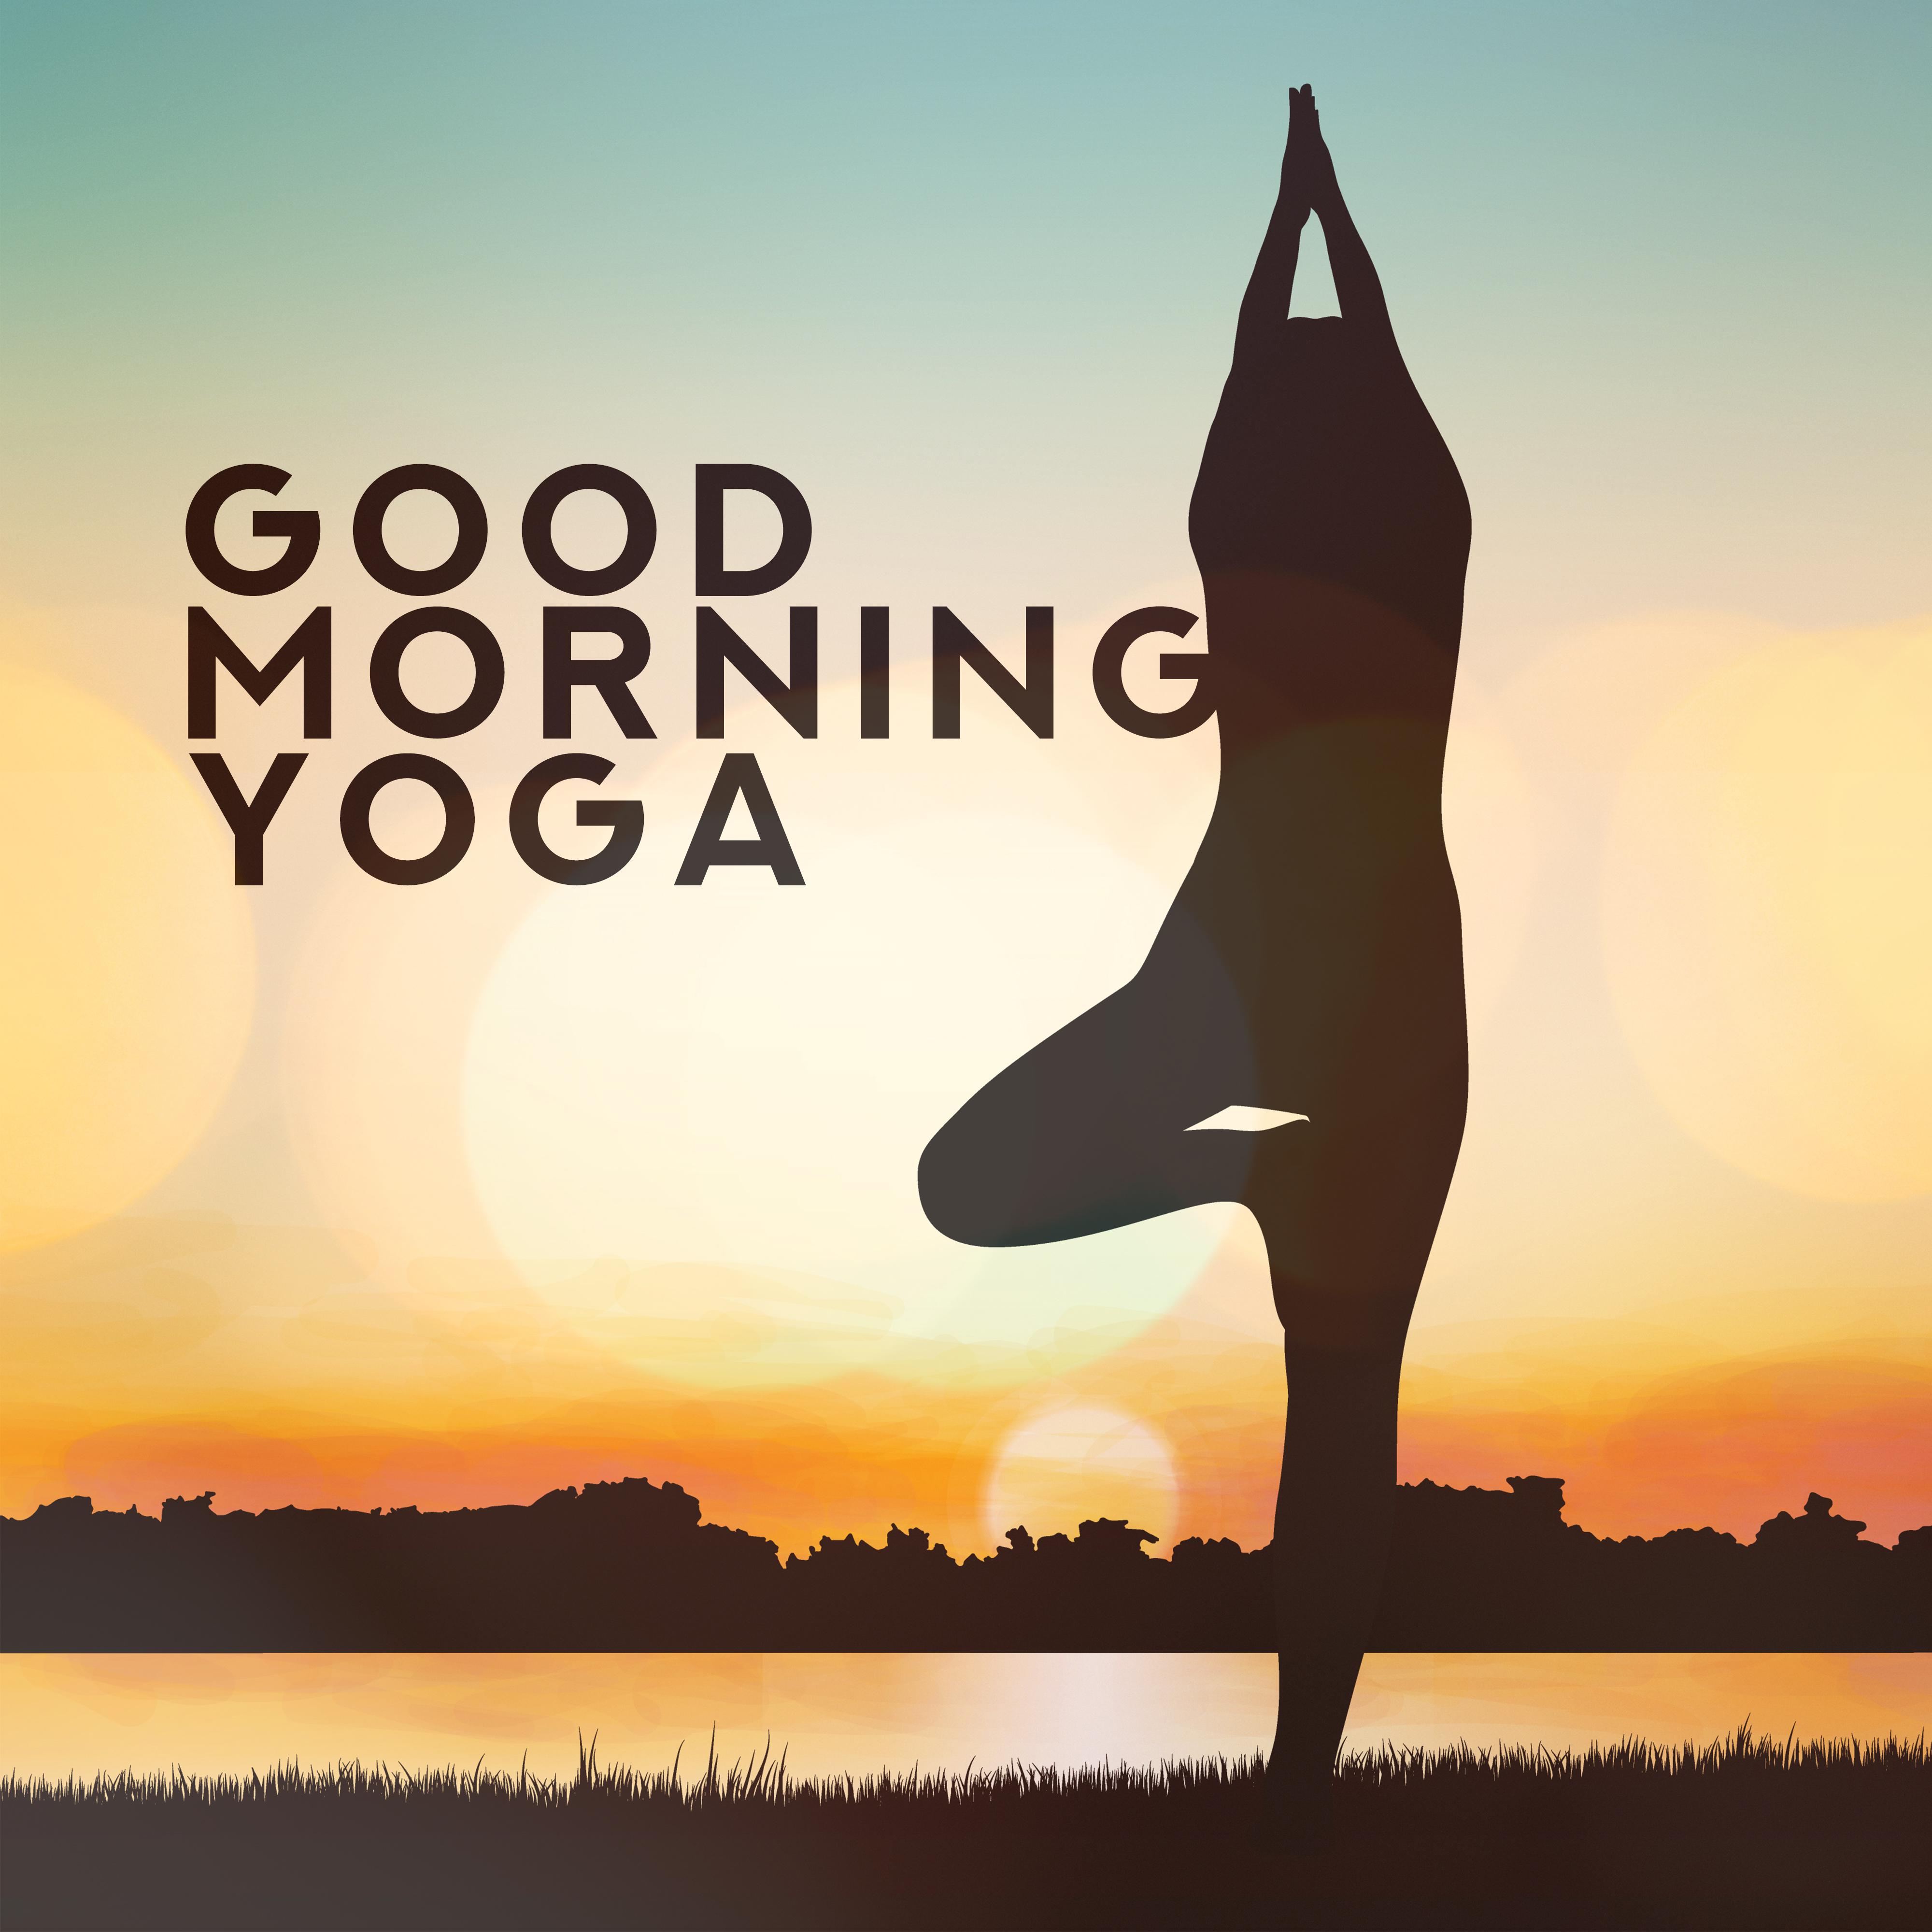 Good Morning Yoga – New Age Meditation Music for a Good Day